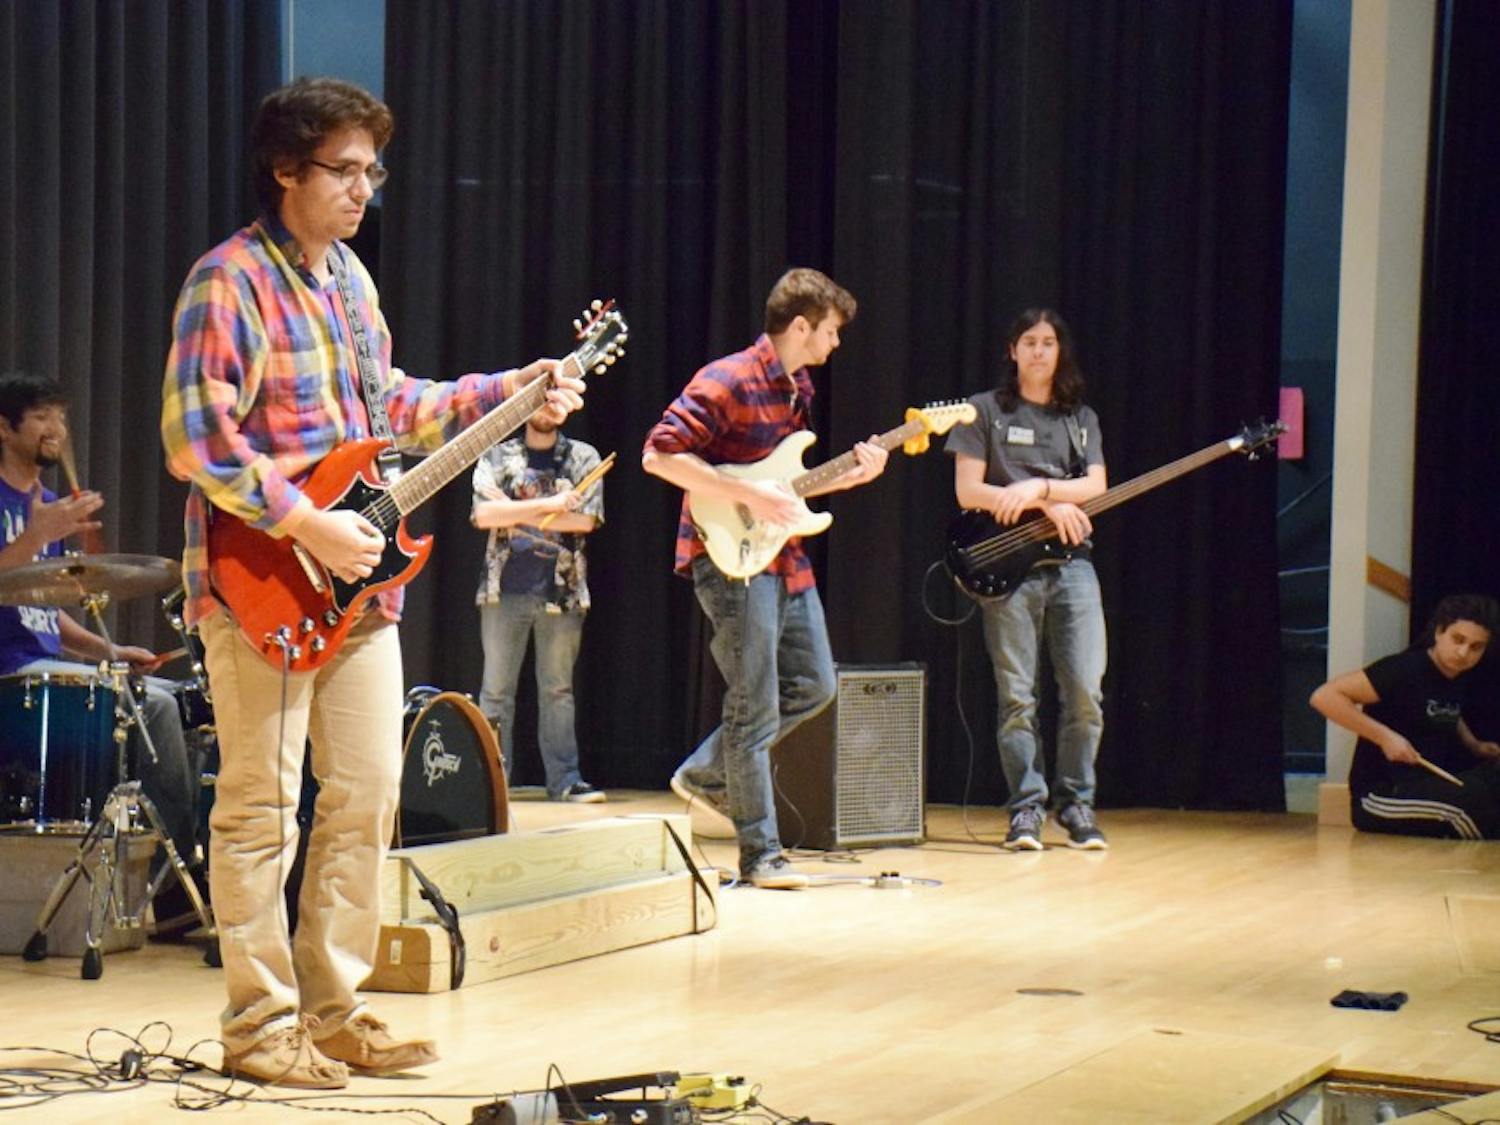 Sophomore international business and finance student Jeremy Landau, pictured with other members of UB Jam Club, warms up his guitar at JAMPROV on Wednesday, December 2 at 6 PM in the SU Theater.